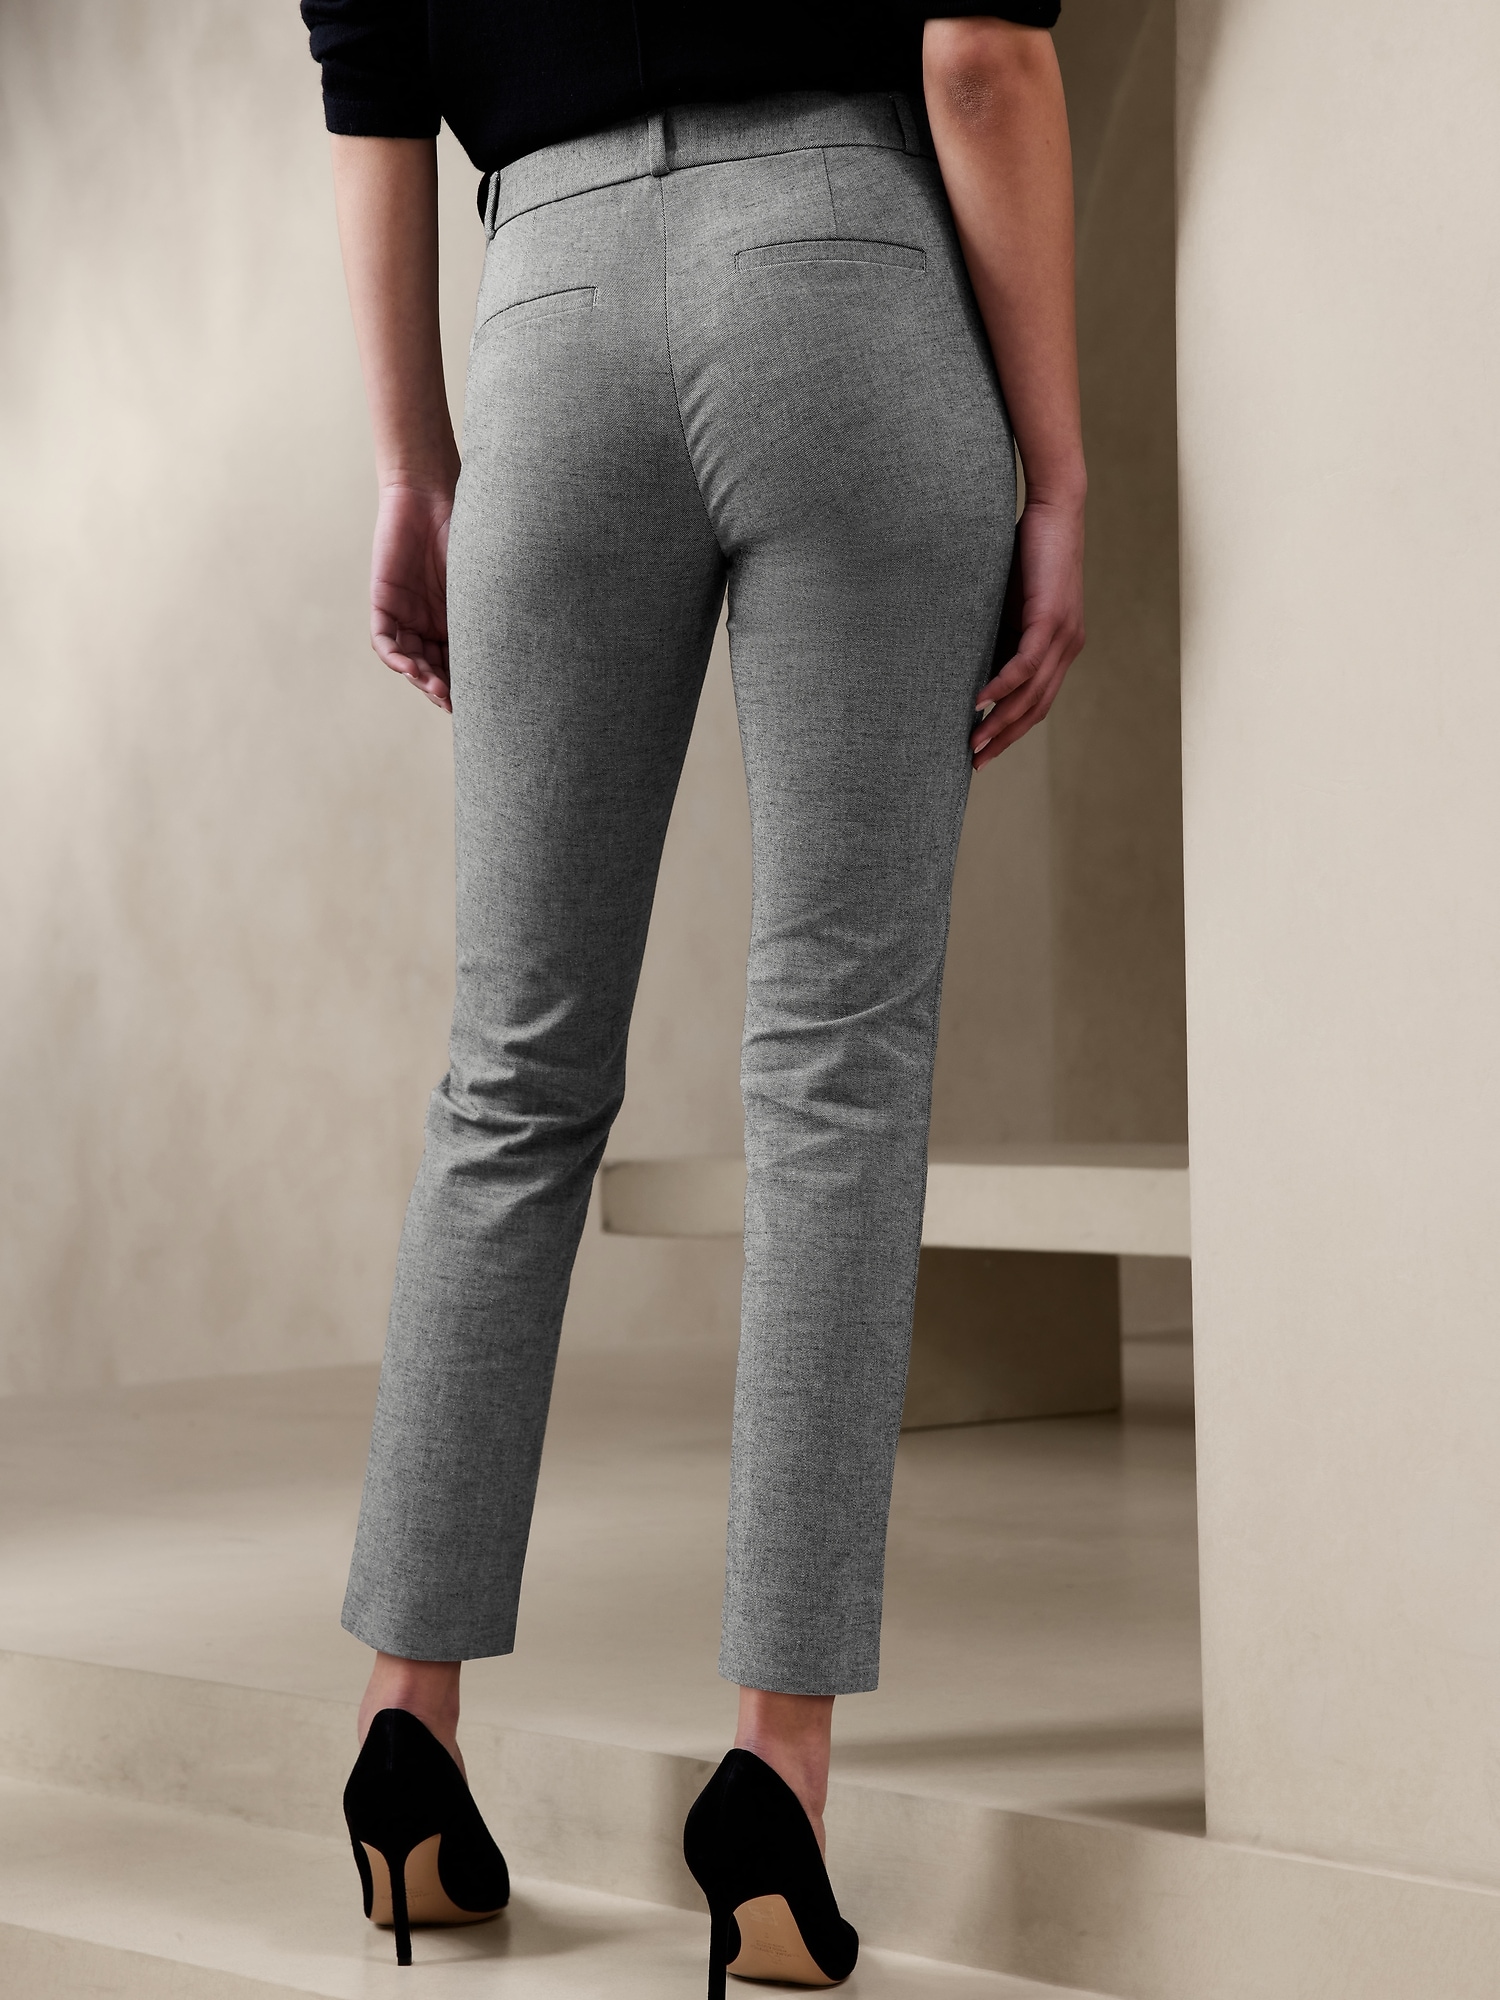 Franish: review: banana republic sloan pant versus the limited exact  stretch skinny pant